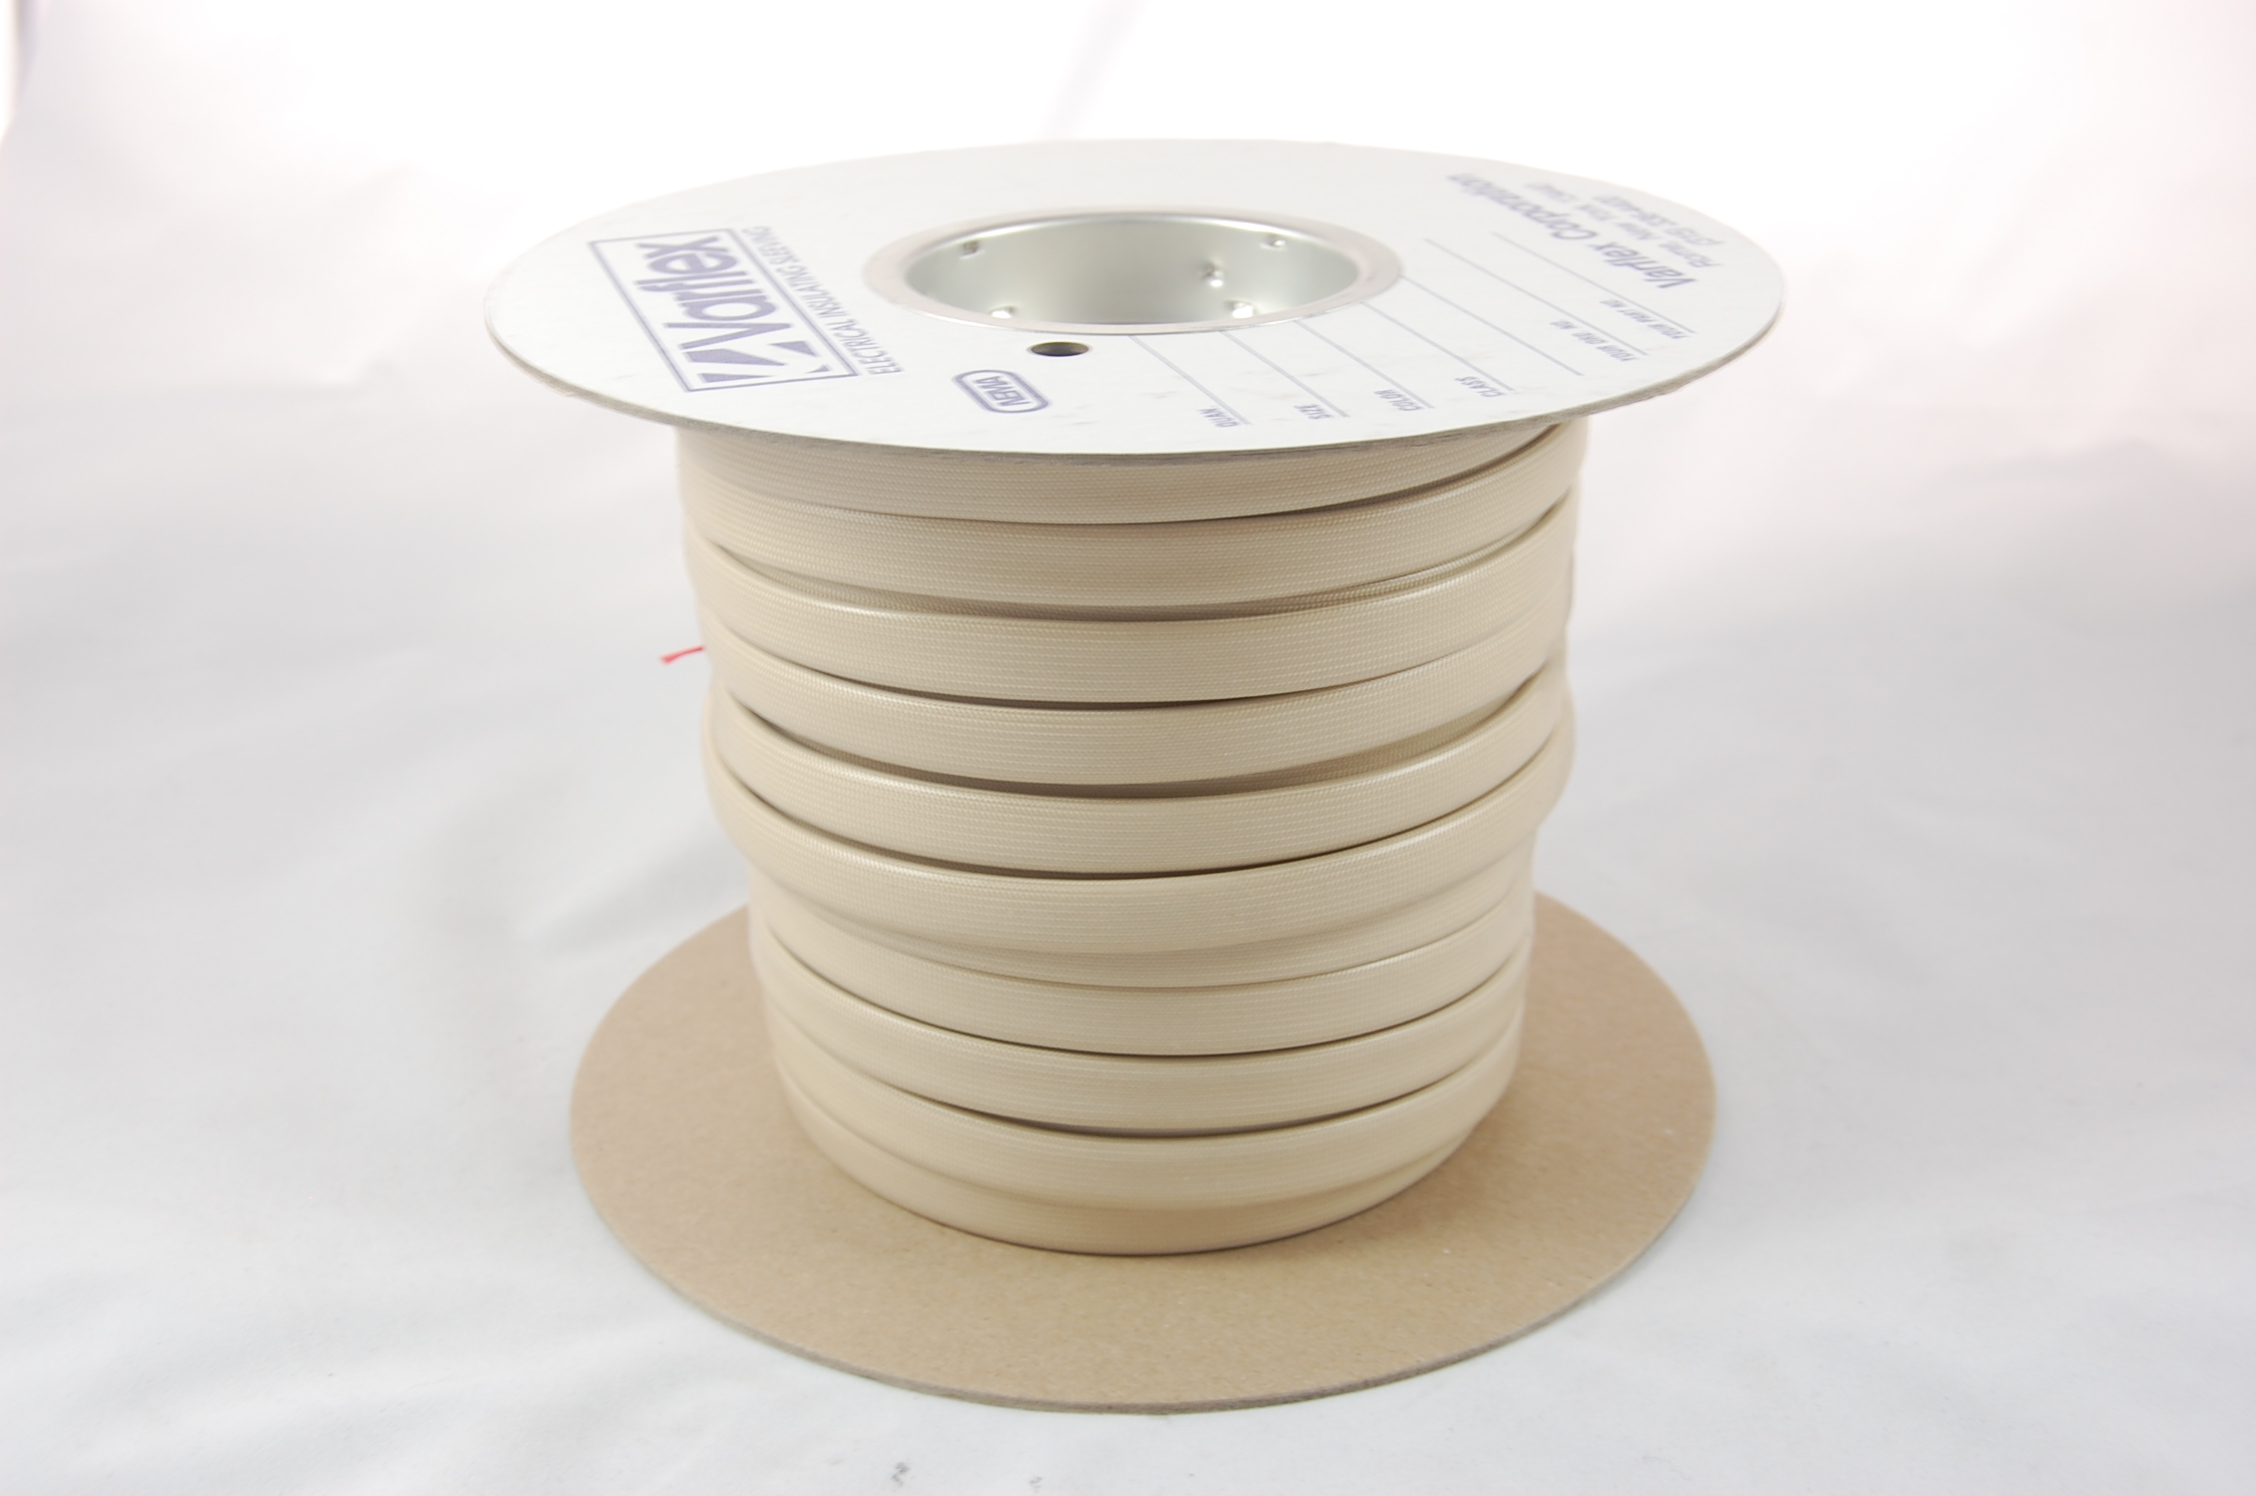 #7 AWG Varglas Silicone Rubber Grade H-A-1 (8000V) High Temperature Silicone Rubber Coated Braided Fiberglass Sleeving 200°C, natural, 150 FT per spool